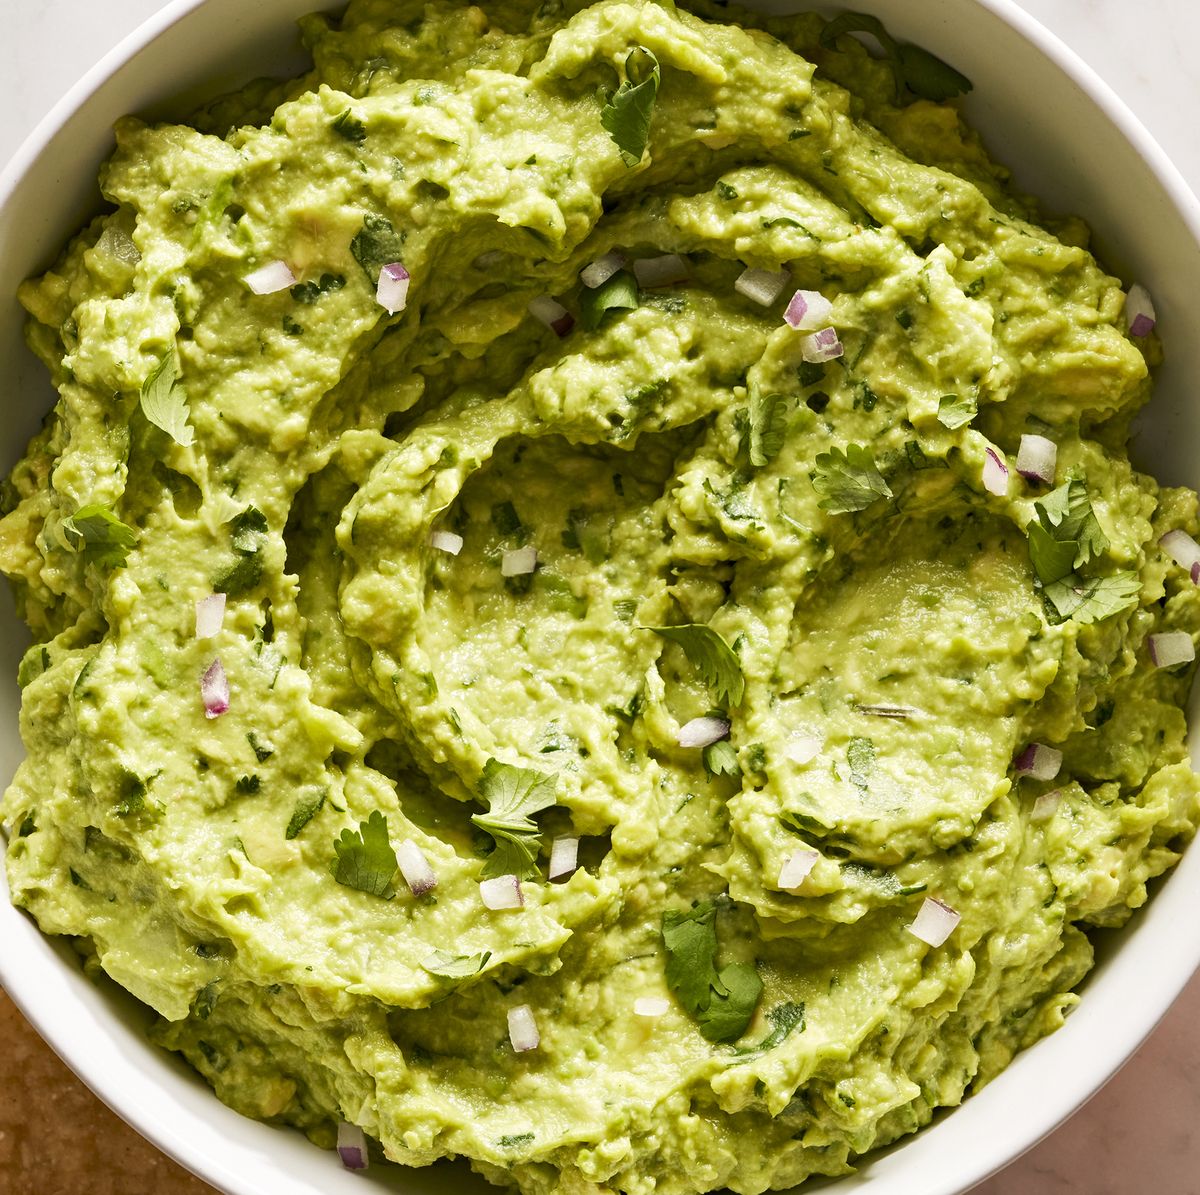 How To Make Healthy Guacamole Dip (Never Turns Brown!)